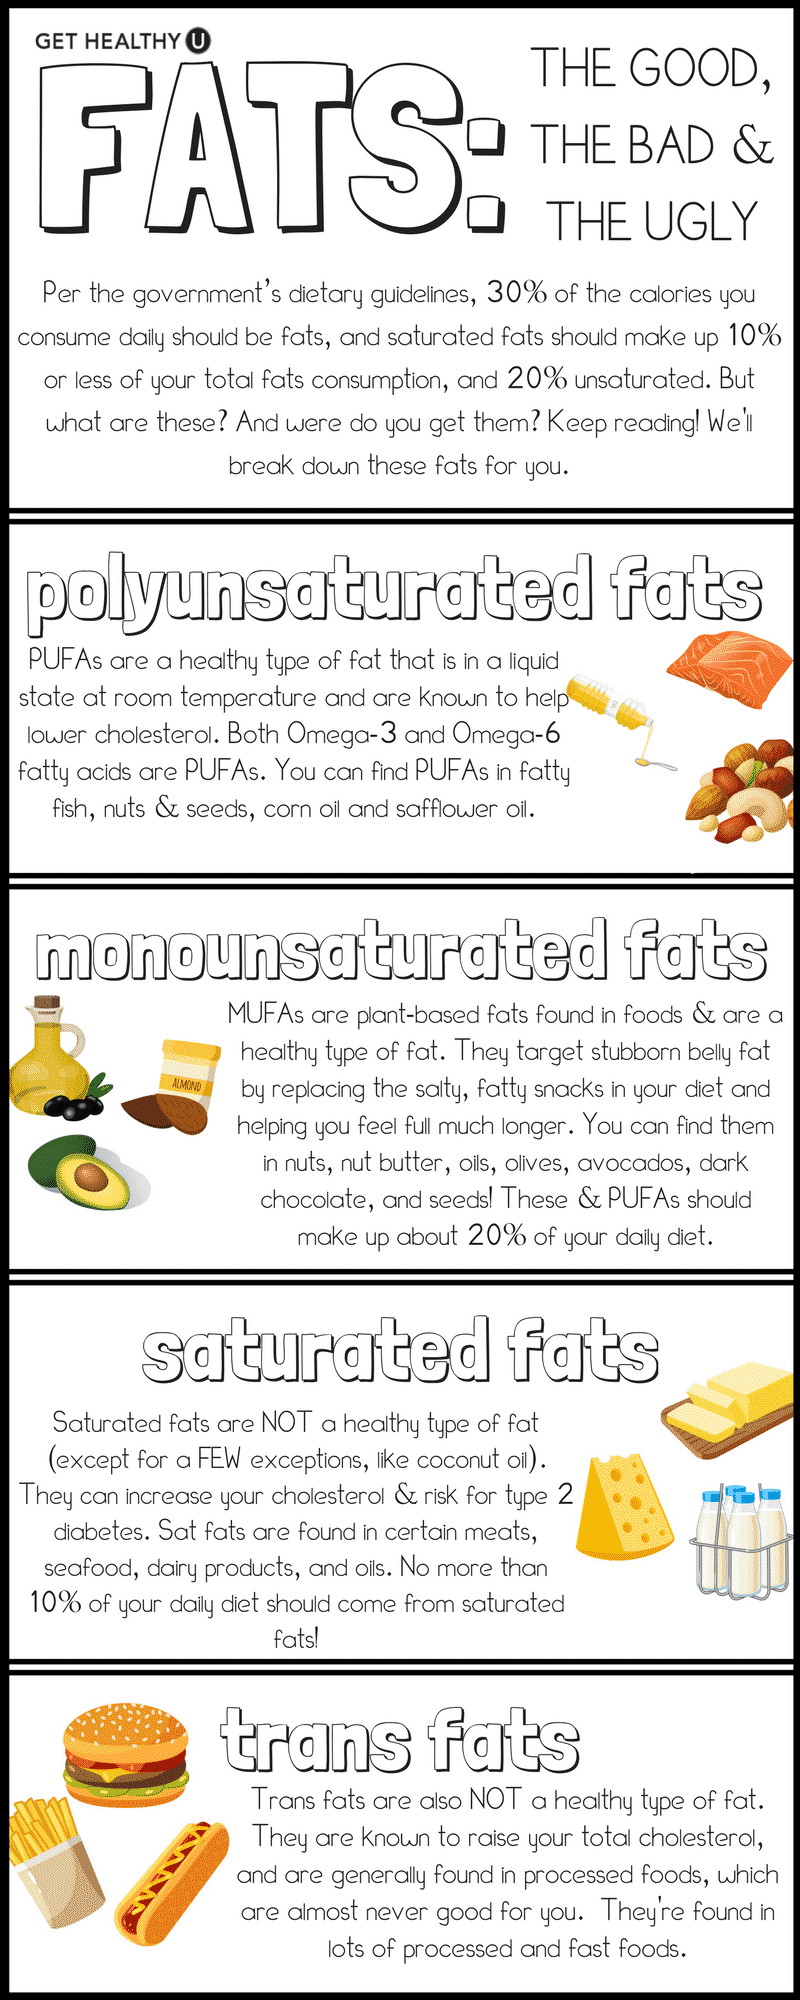 Check out this graphic we designed breaking down the differences between Monounsaturated fats, polyunsaturated fats, saturated fats, and trans fats! This will help answer the question: What is a MUFA? And will break down the differences between these 4 types of fat!